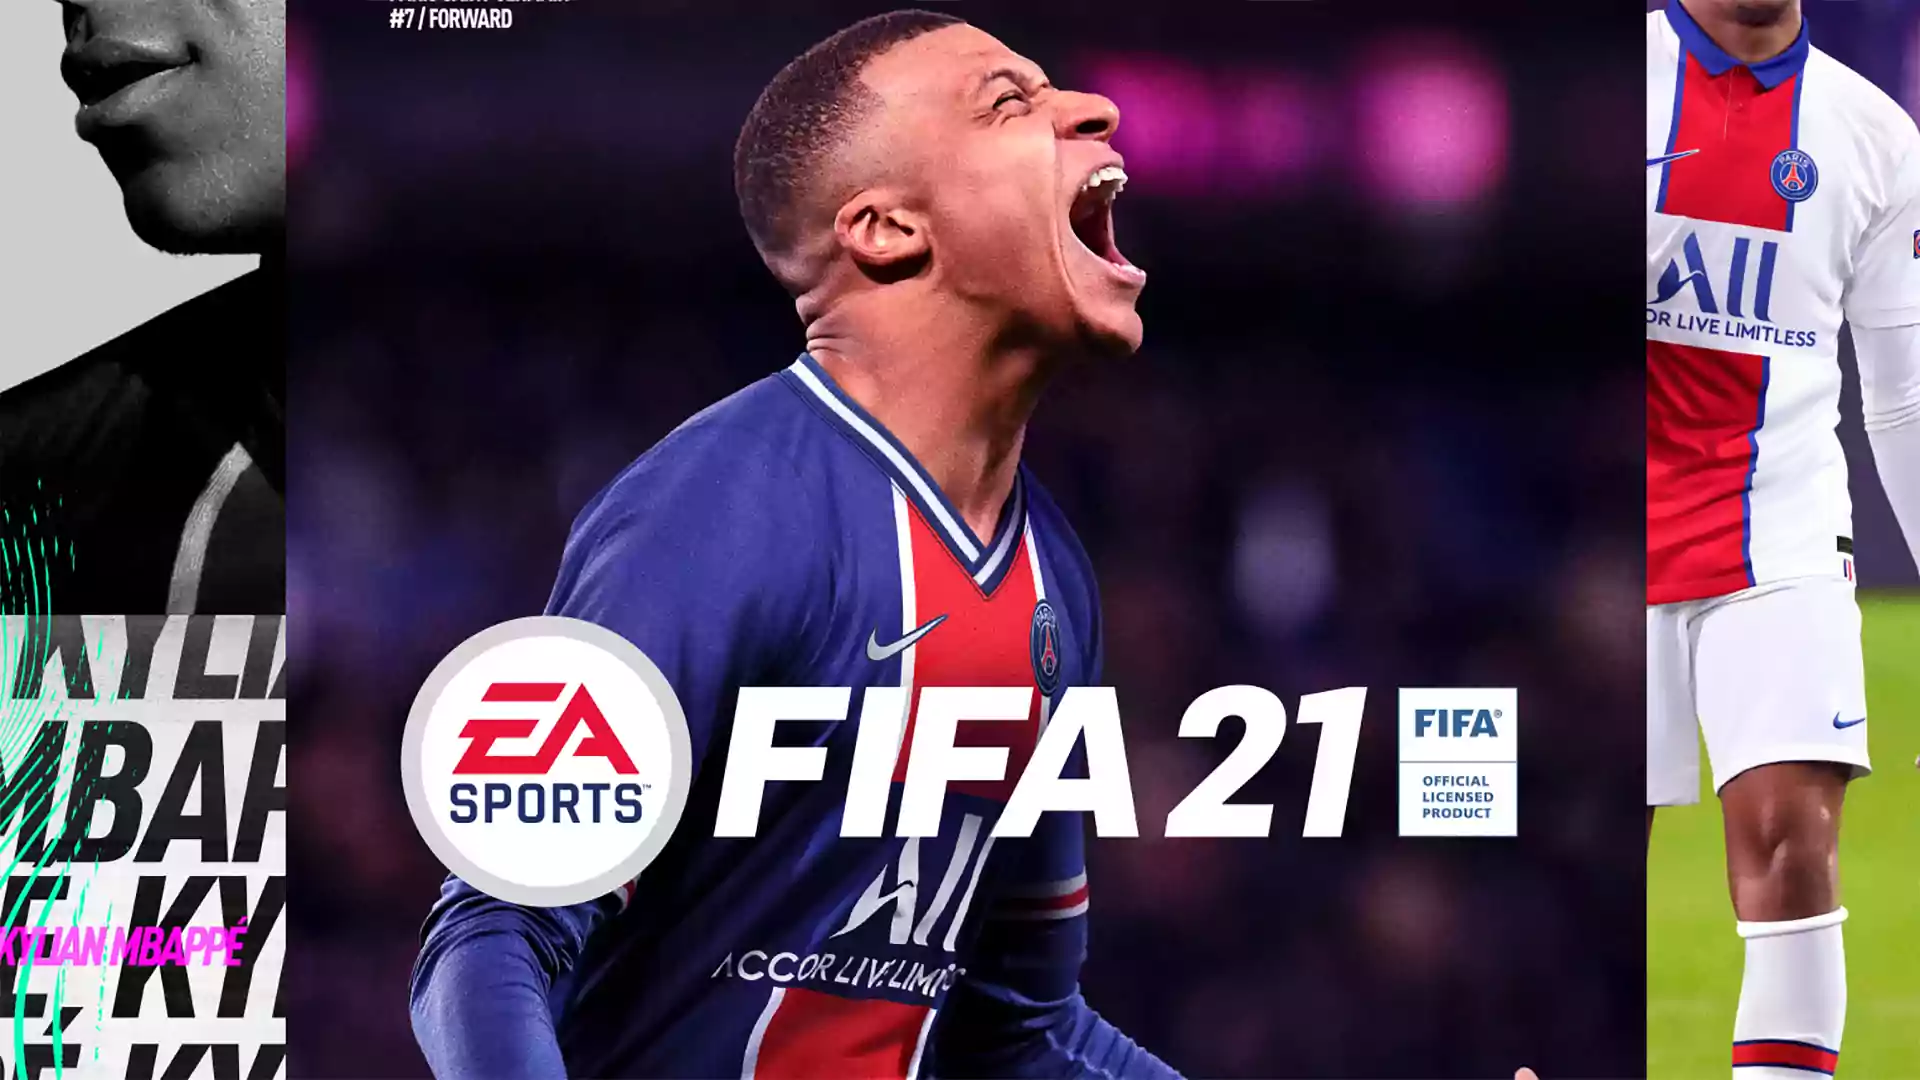 FIFA 21: Mbappe Is The Star Of The Cover In 3 Editions